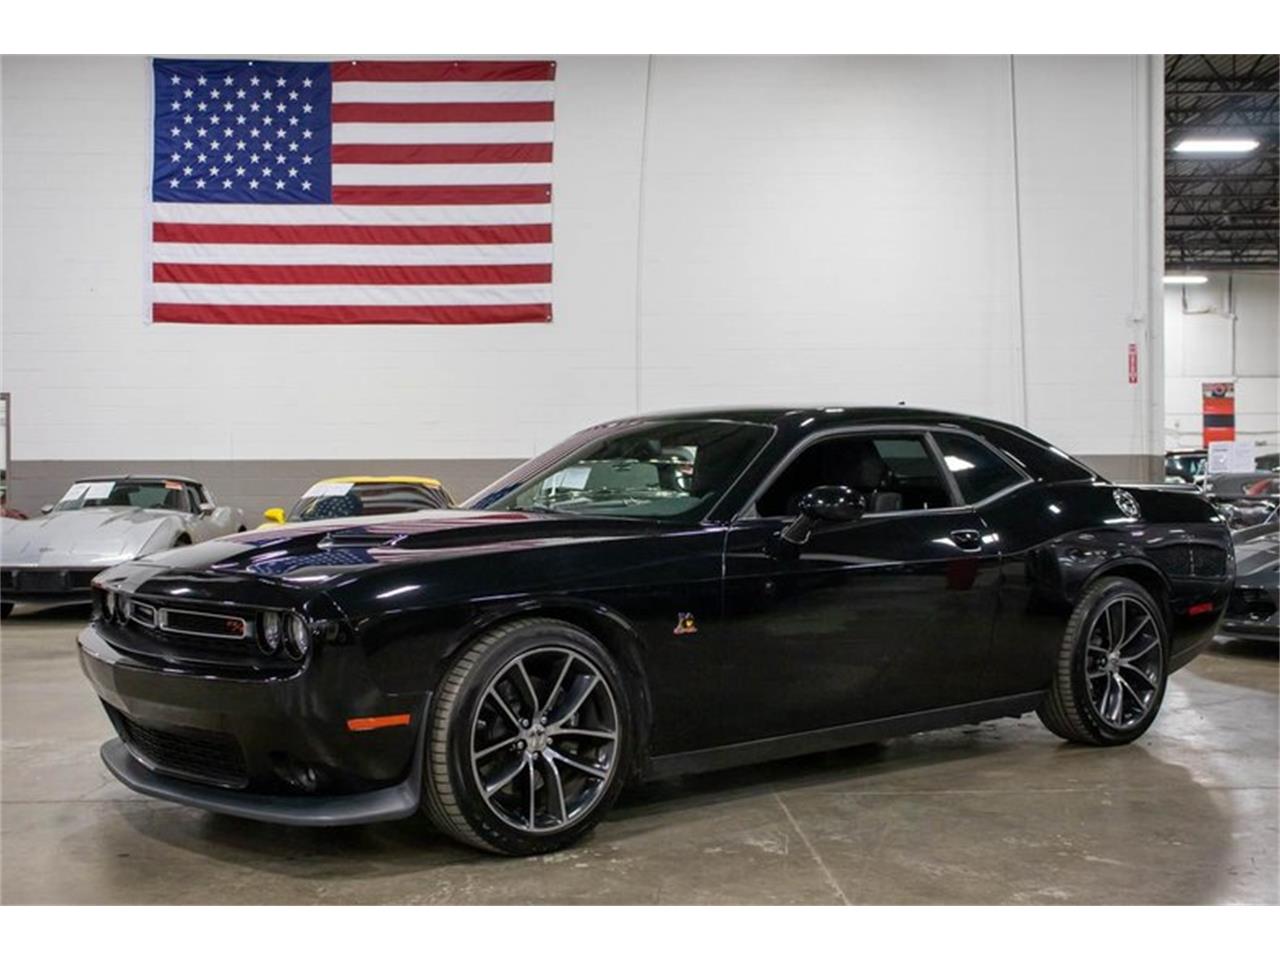 for sale 2016 dodge challenger in kentwood, michigan cars - grand rapids, mi at geebo